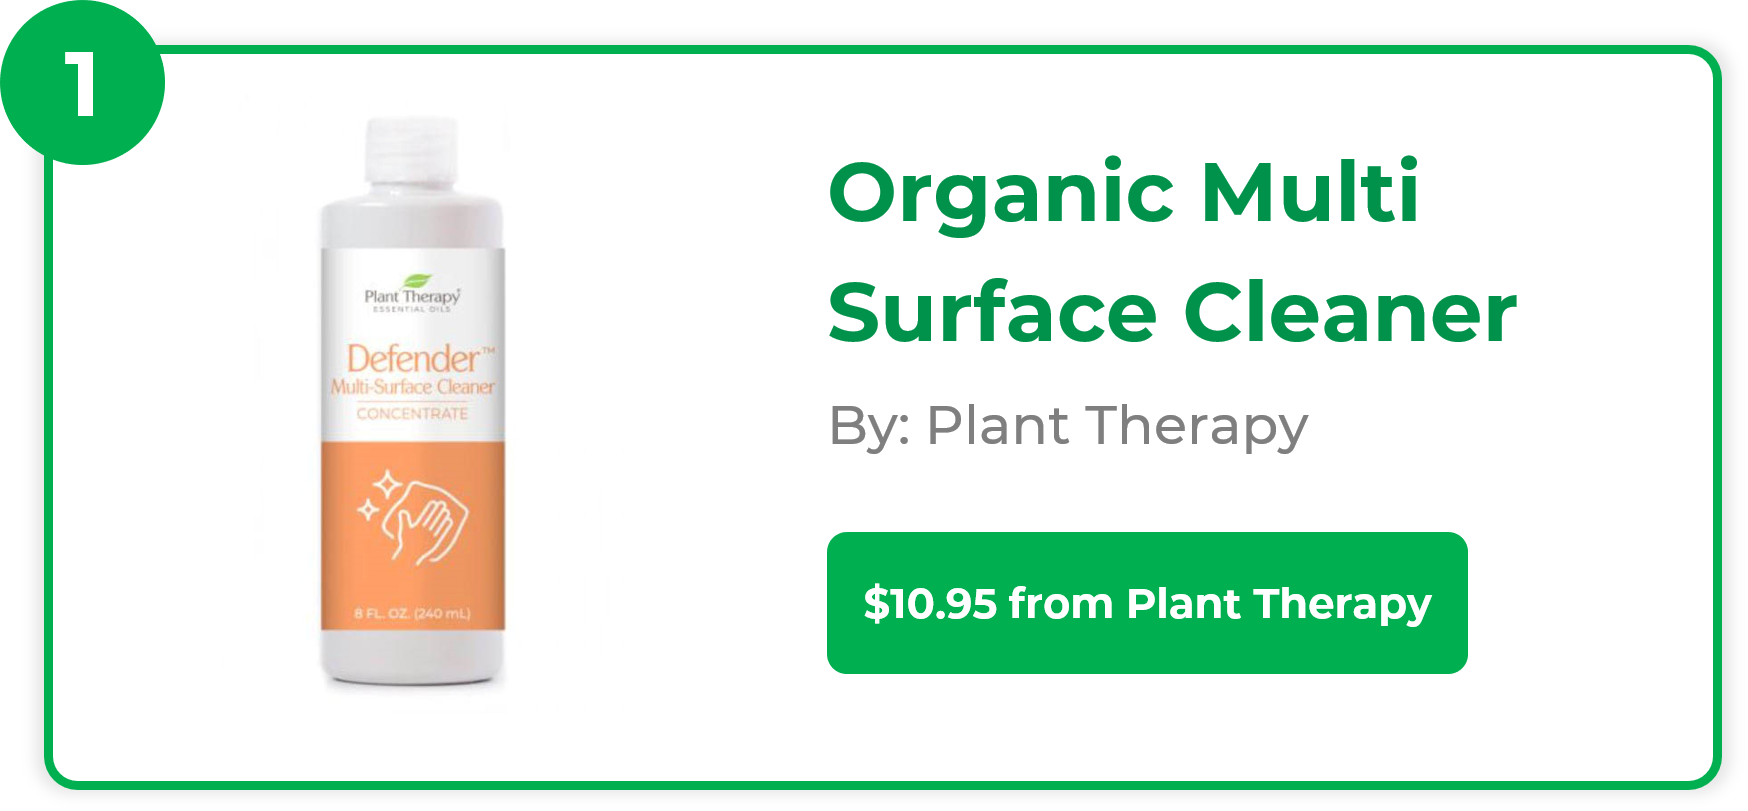 Organic Multi Surface Cleaner - Plant Therapy